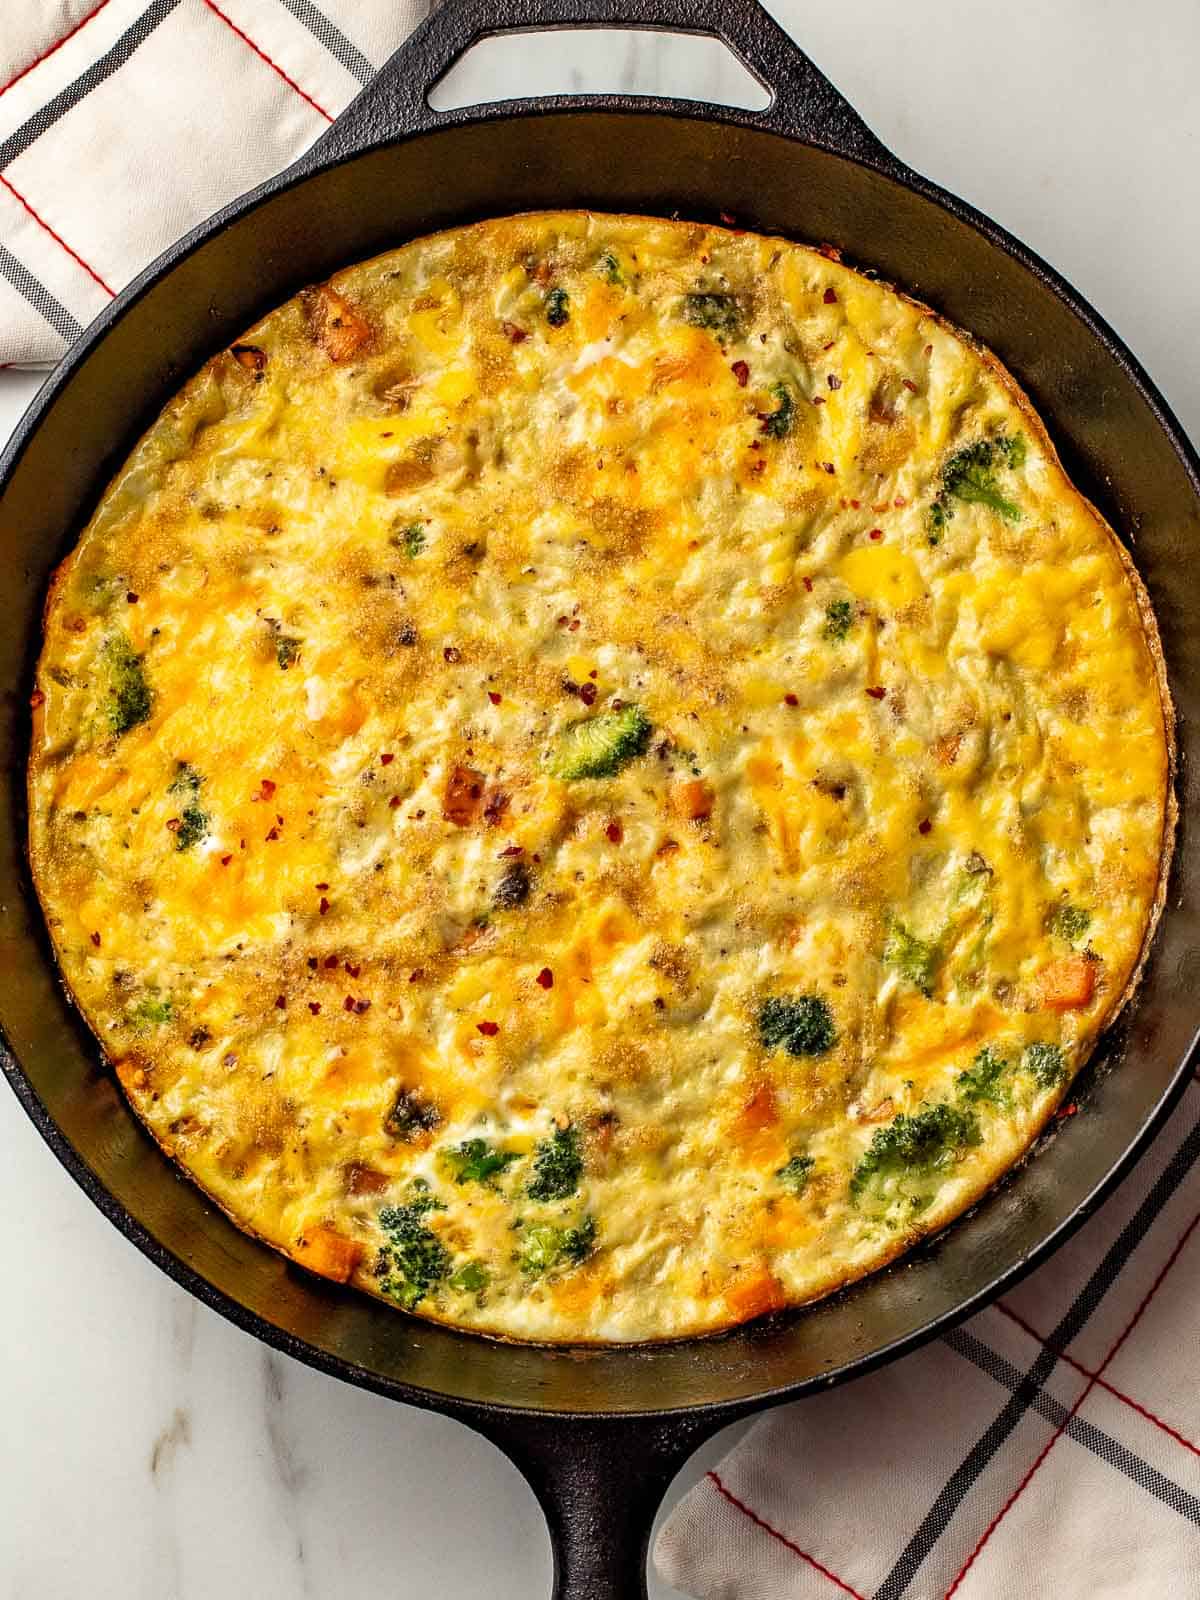 Sweet potato and broccoli frittata in a cast iron skillet.